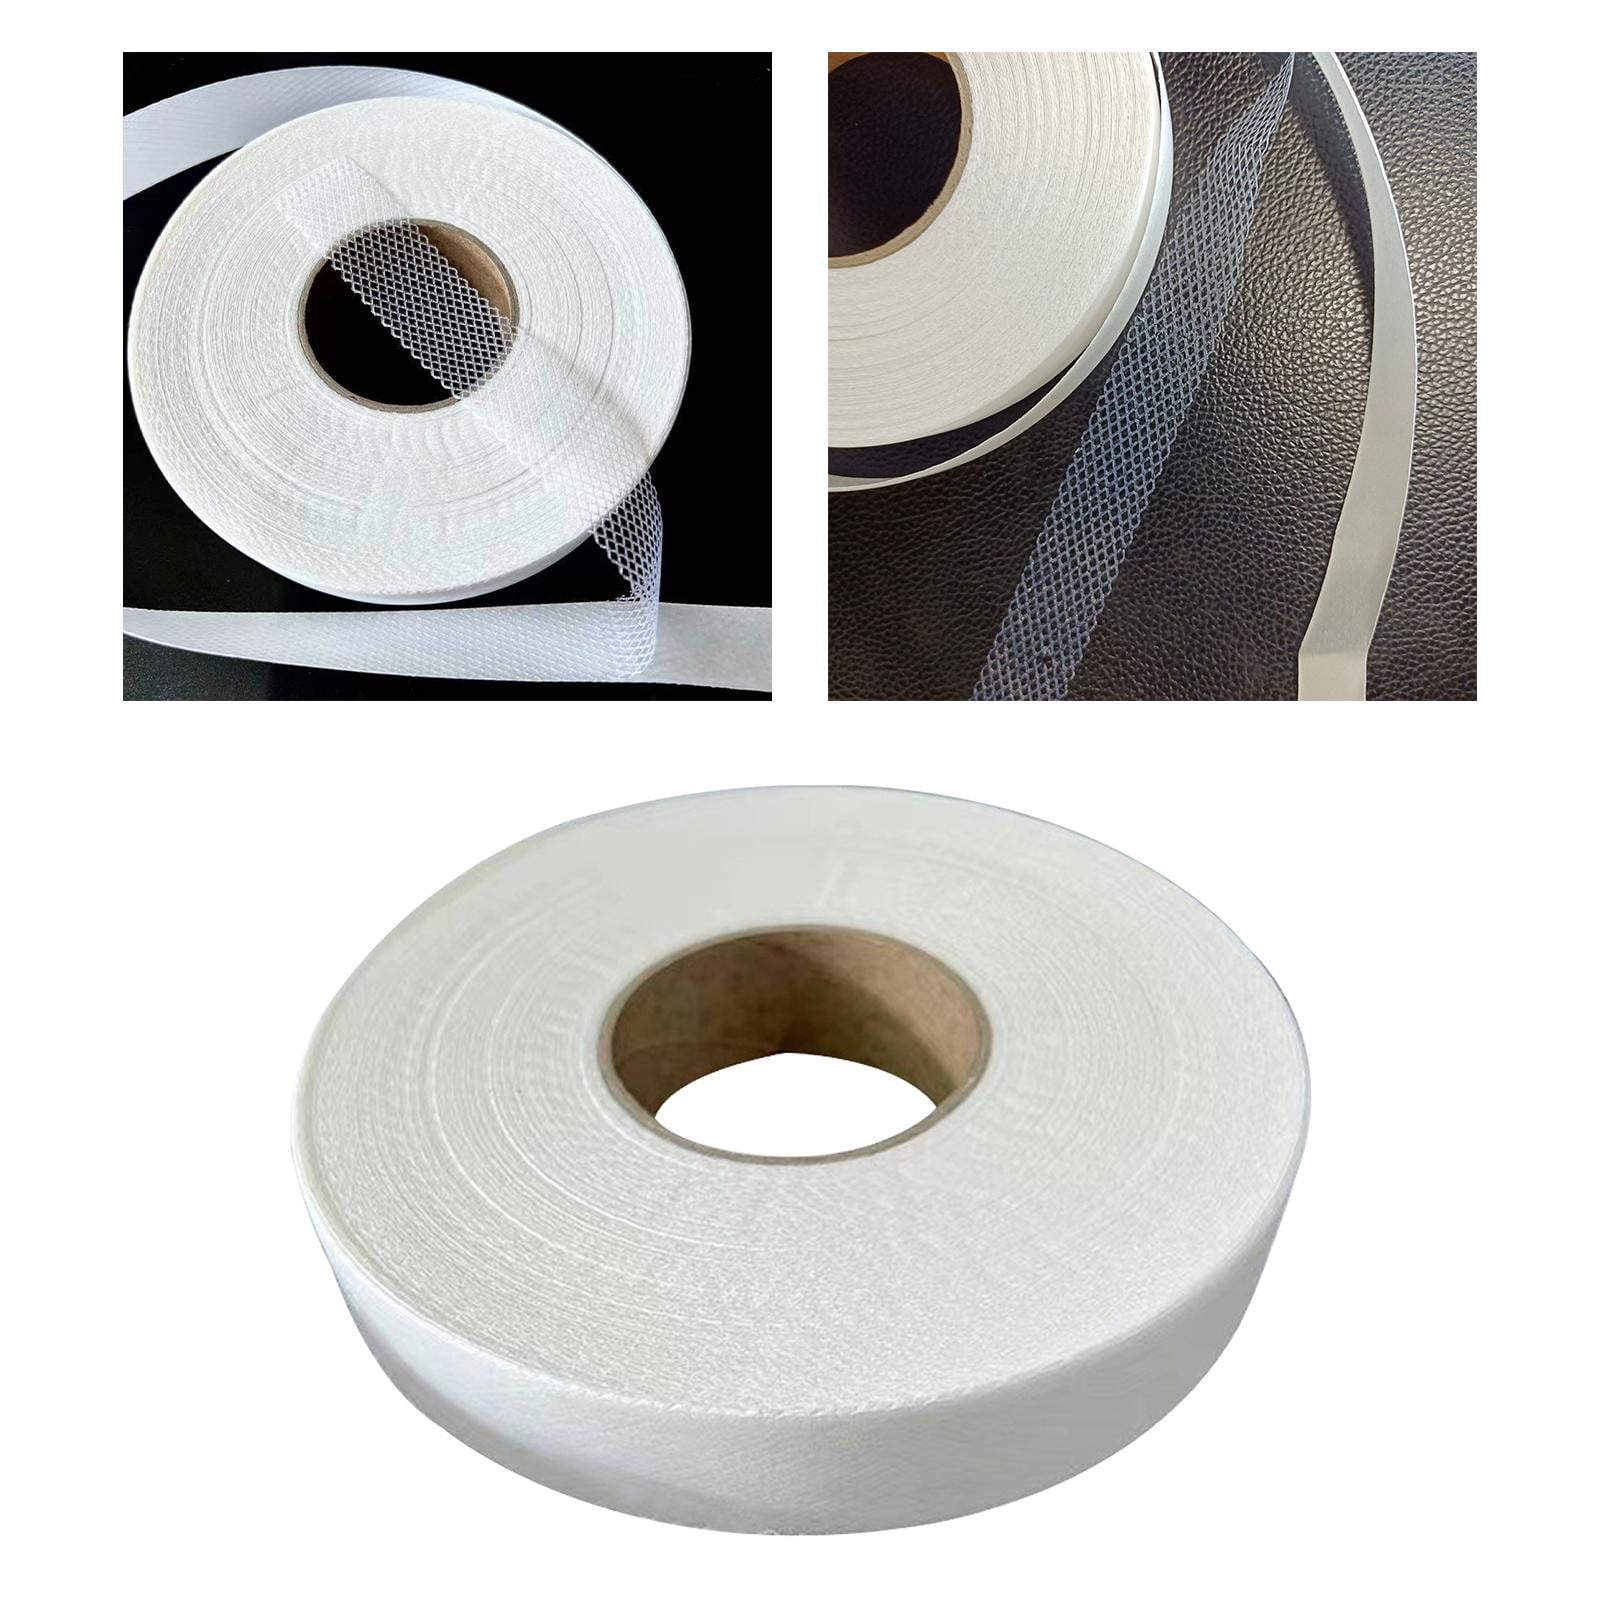 Washable Iron Tape Patching Sewing Accessories Double Sided Tape Fabric  Fusing Hemming Tape for DIY Garment, Dress, Skirt, Pants, Clothes 3cmx50m 